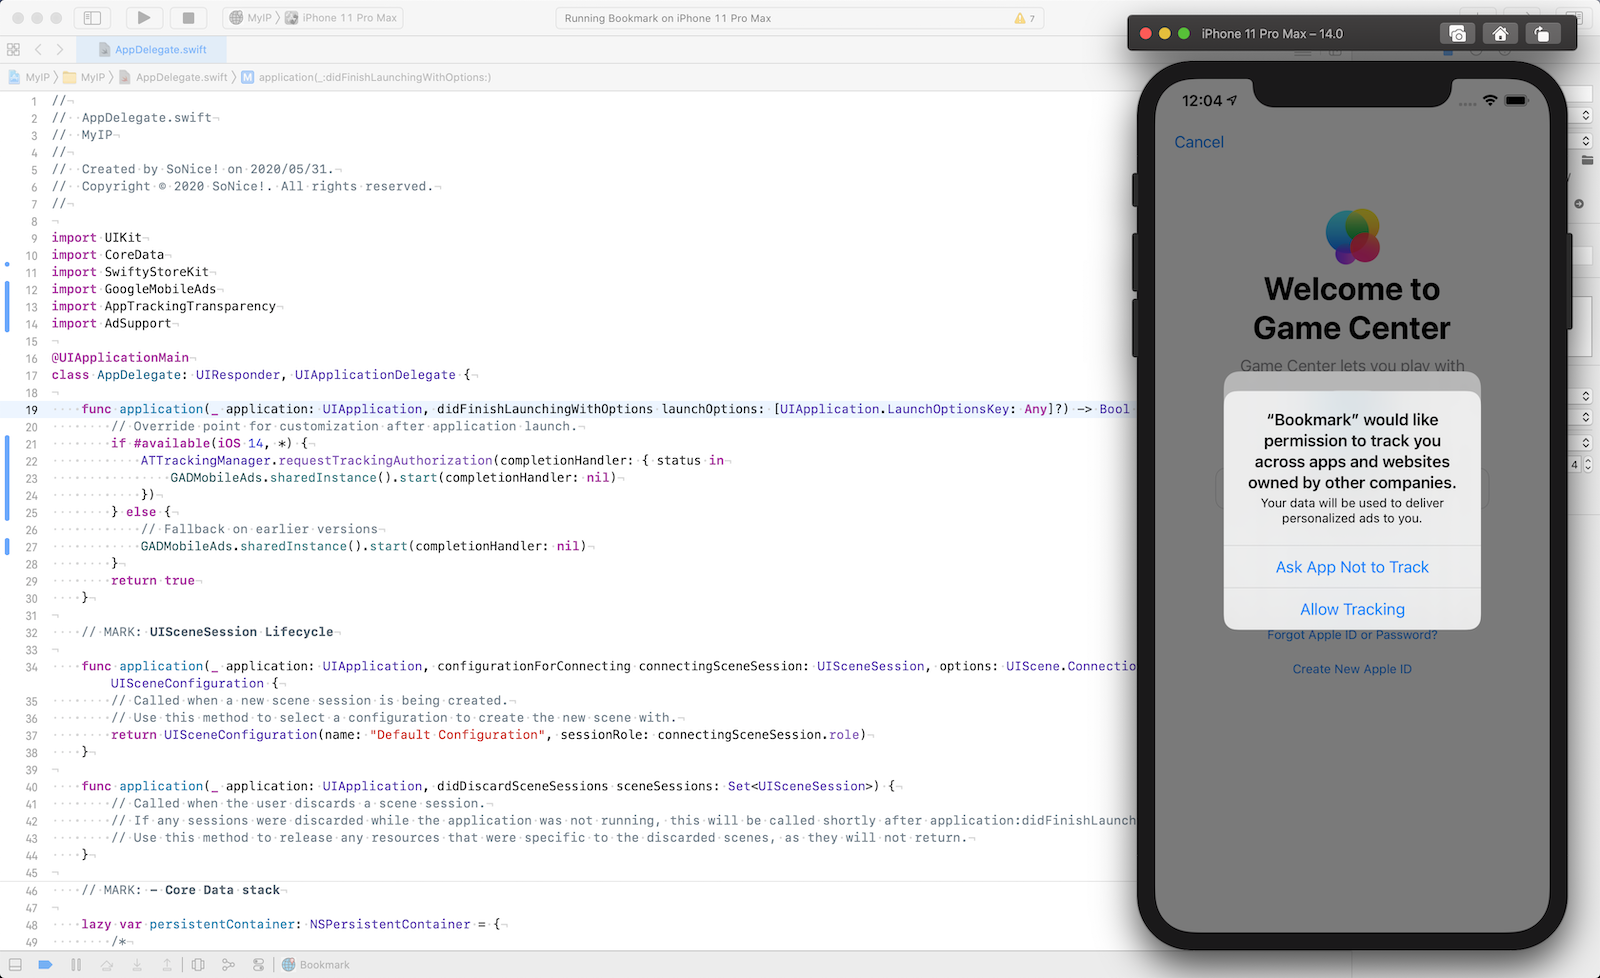 Display of Update SwiftUI App with AdMob for IDFA and AppTrackingTransparency of iOS 14